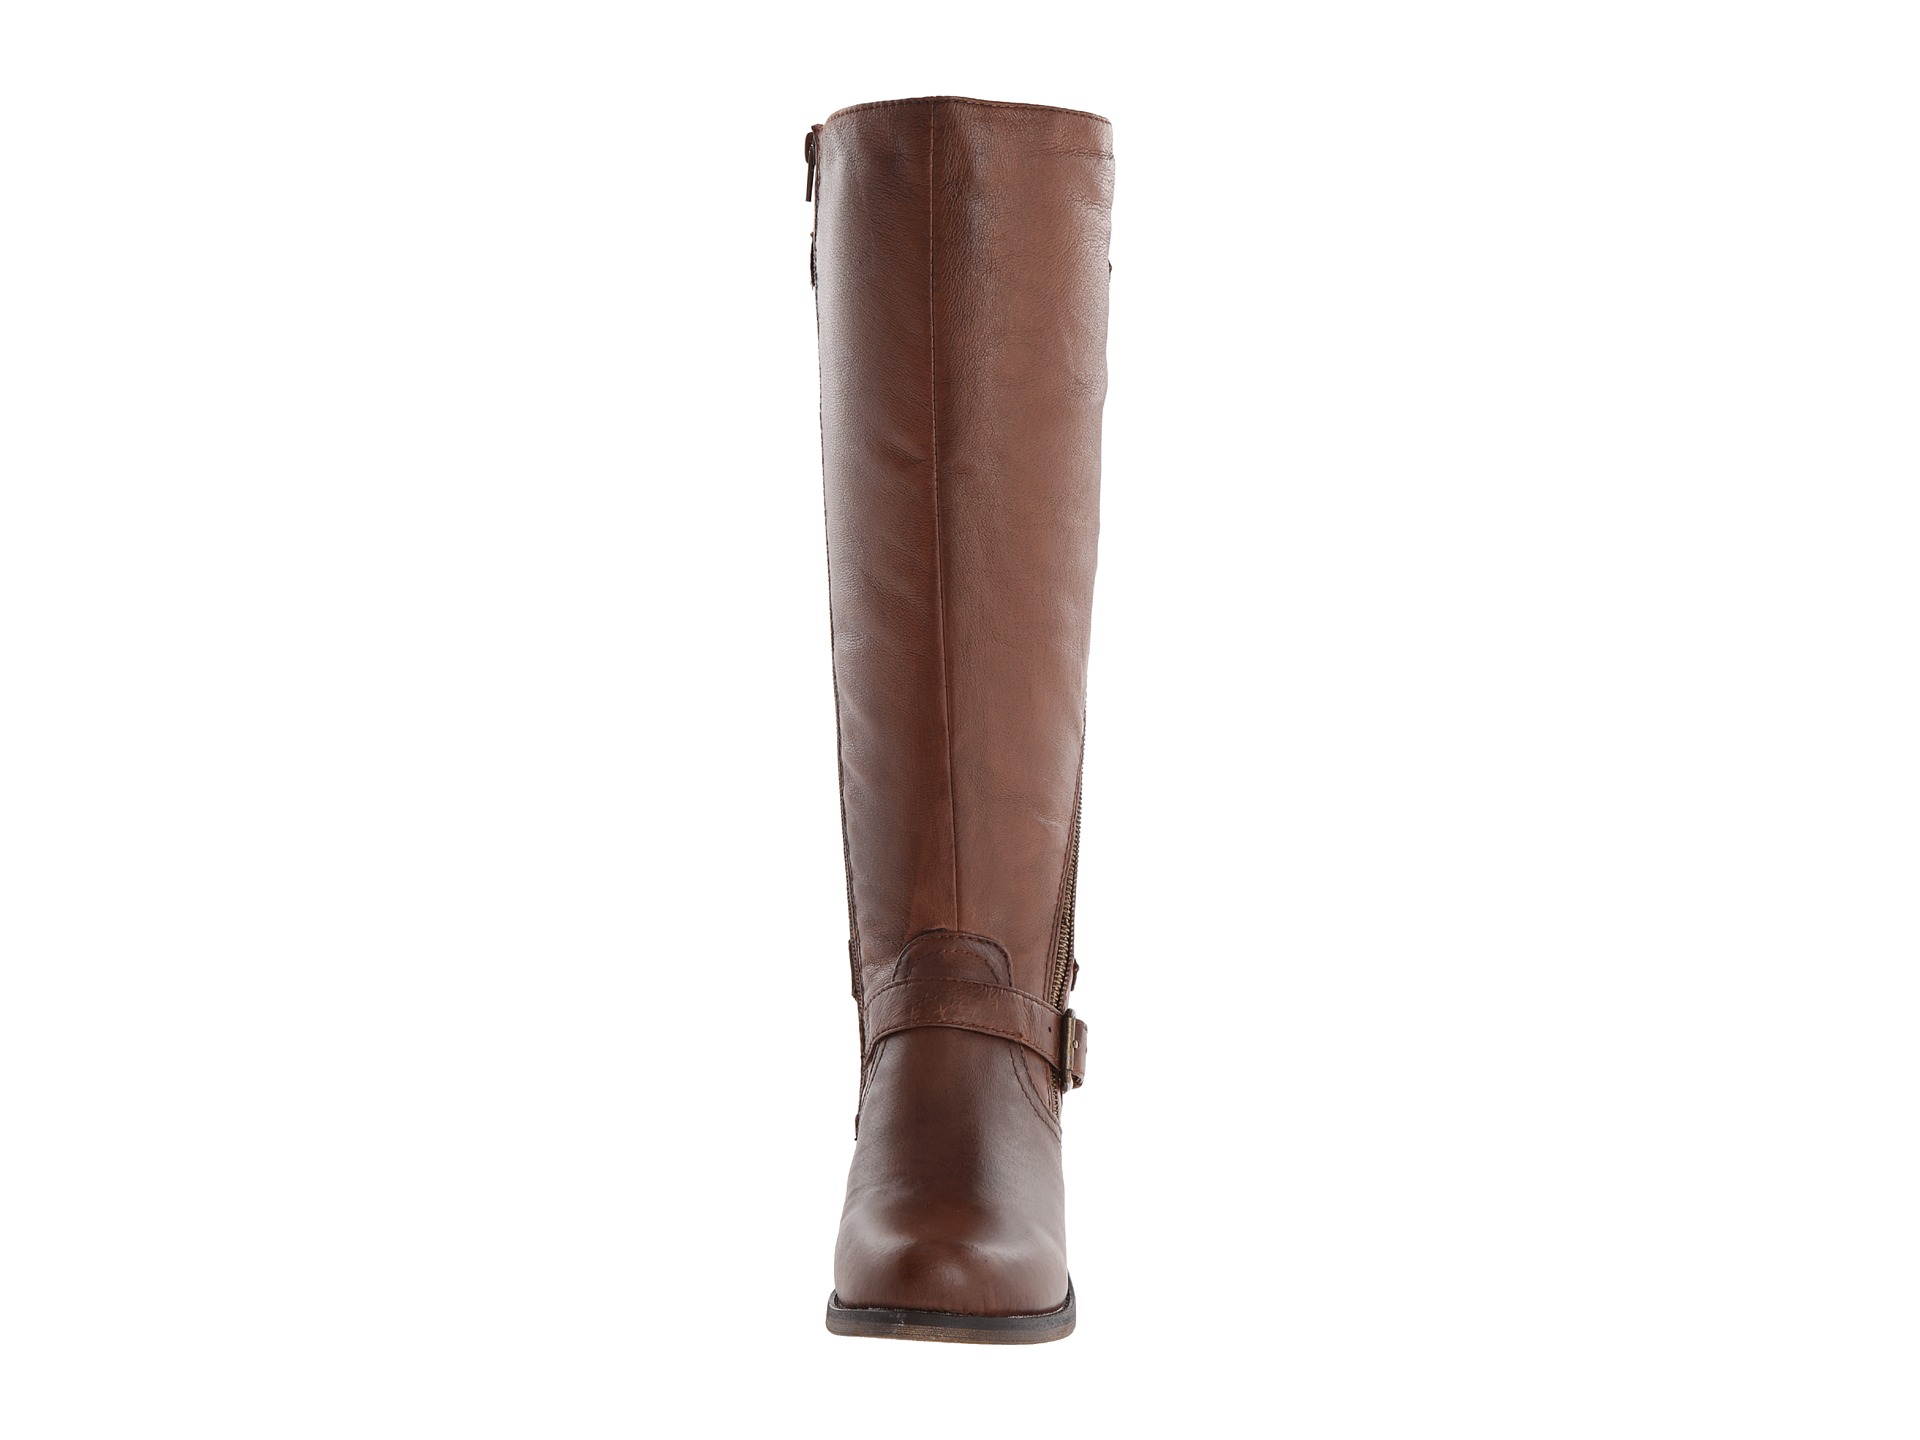 Steve Madden Syniclew Wide Calf Brown | Shipped Free at Zappos